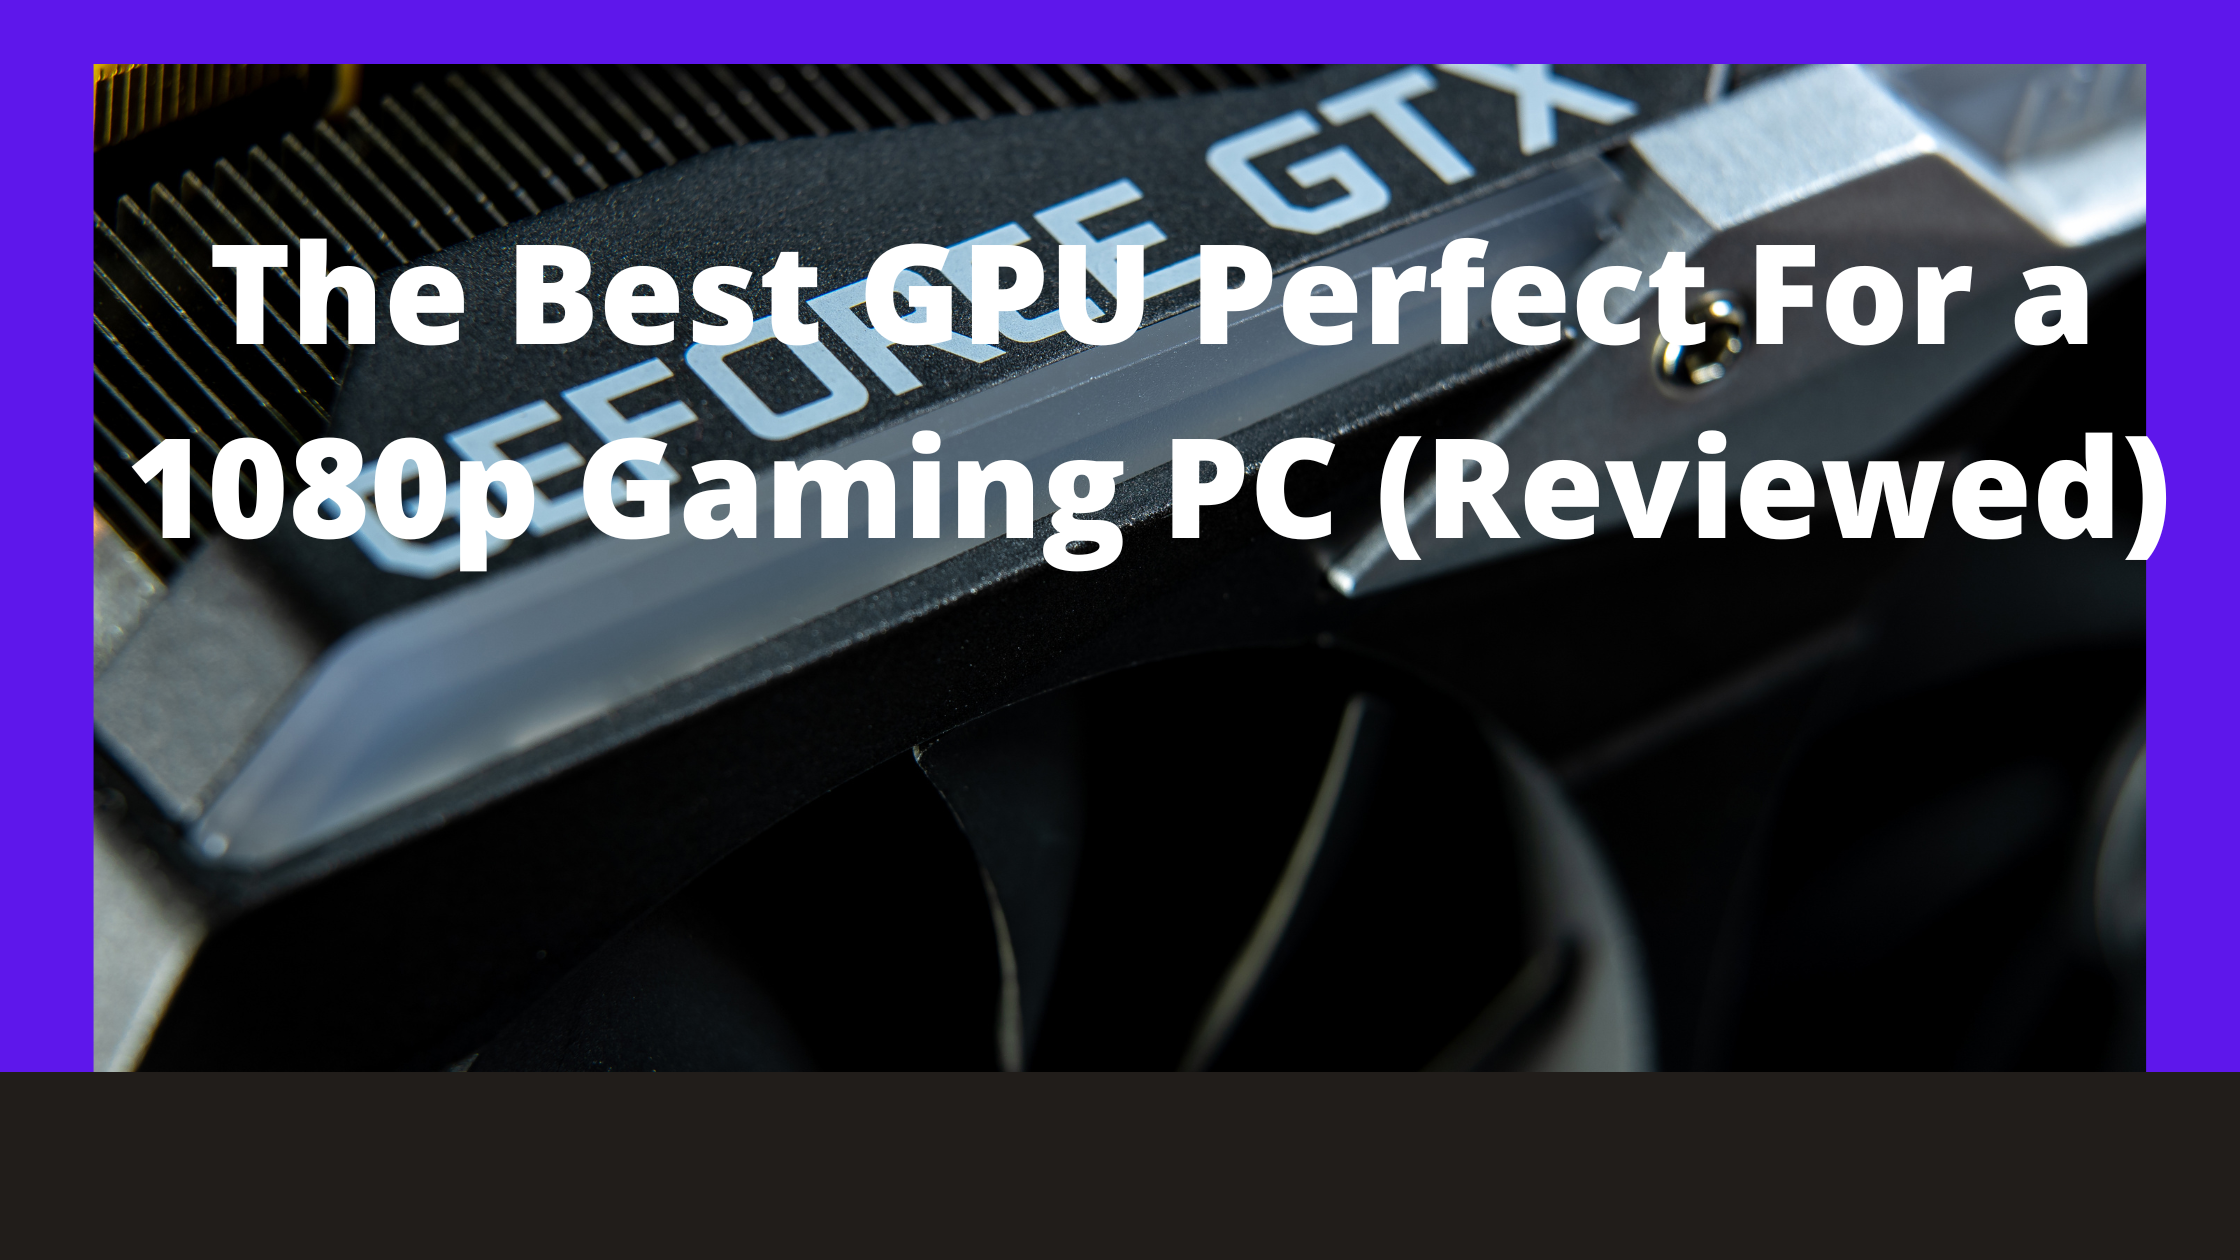 The Best GPU Perfect For a 1080p Gaming PC (Reviewed)